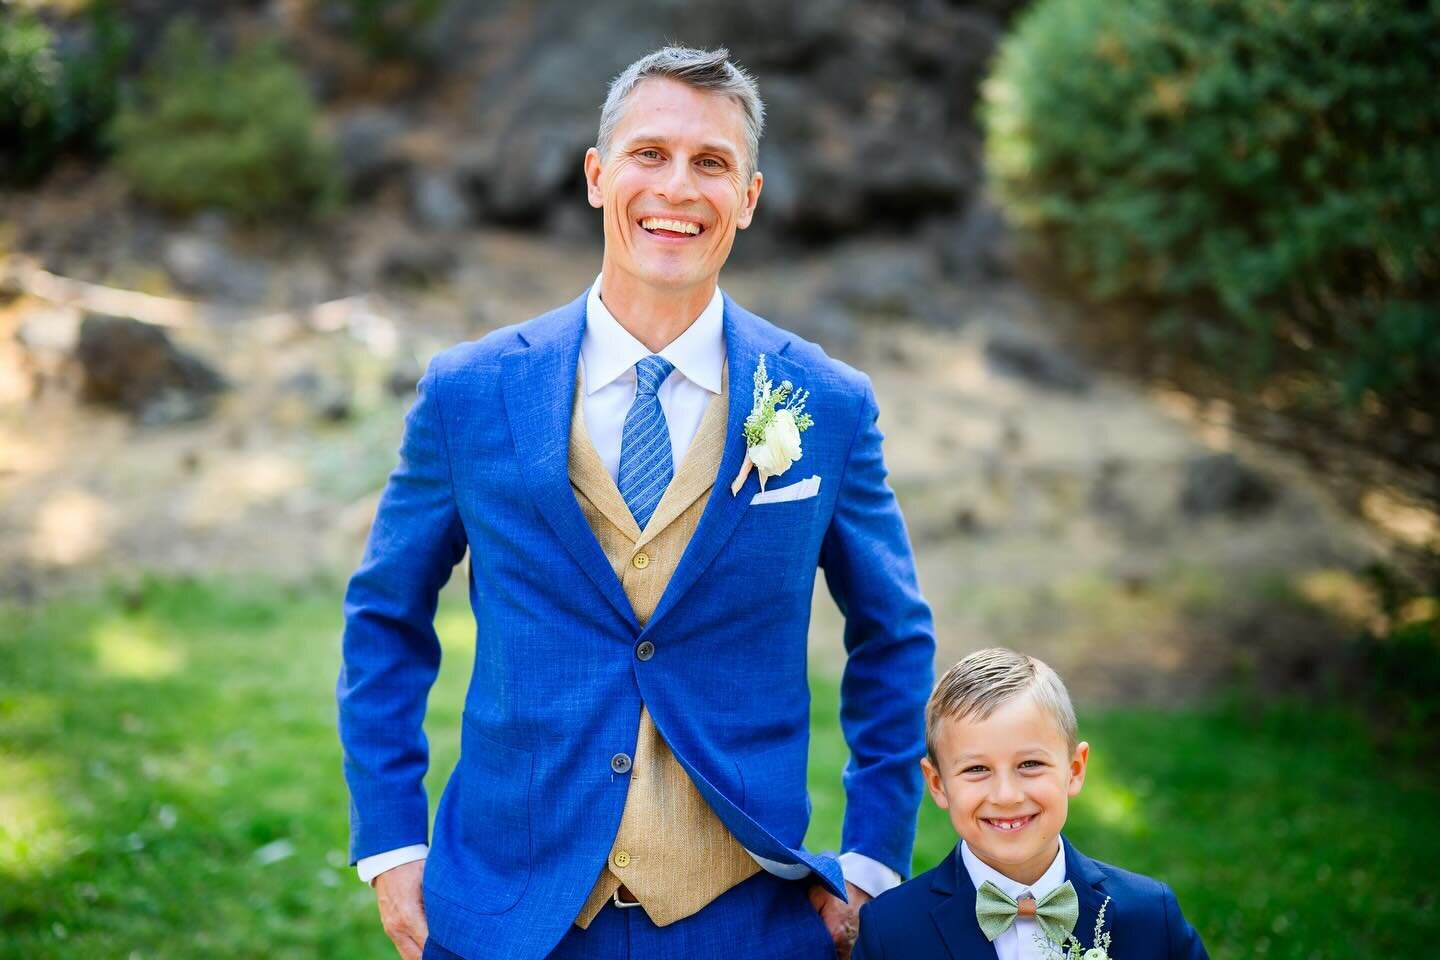 Happy Birthday to this bright soul who I have the honor of calling husband. 

@travisstarr28, you are an extraordinary father, brilliant business owner, loving son, brother and friend. 

You are
Strong yet gentle. 
Wise yet humble. 
Strategic and dyn